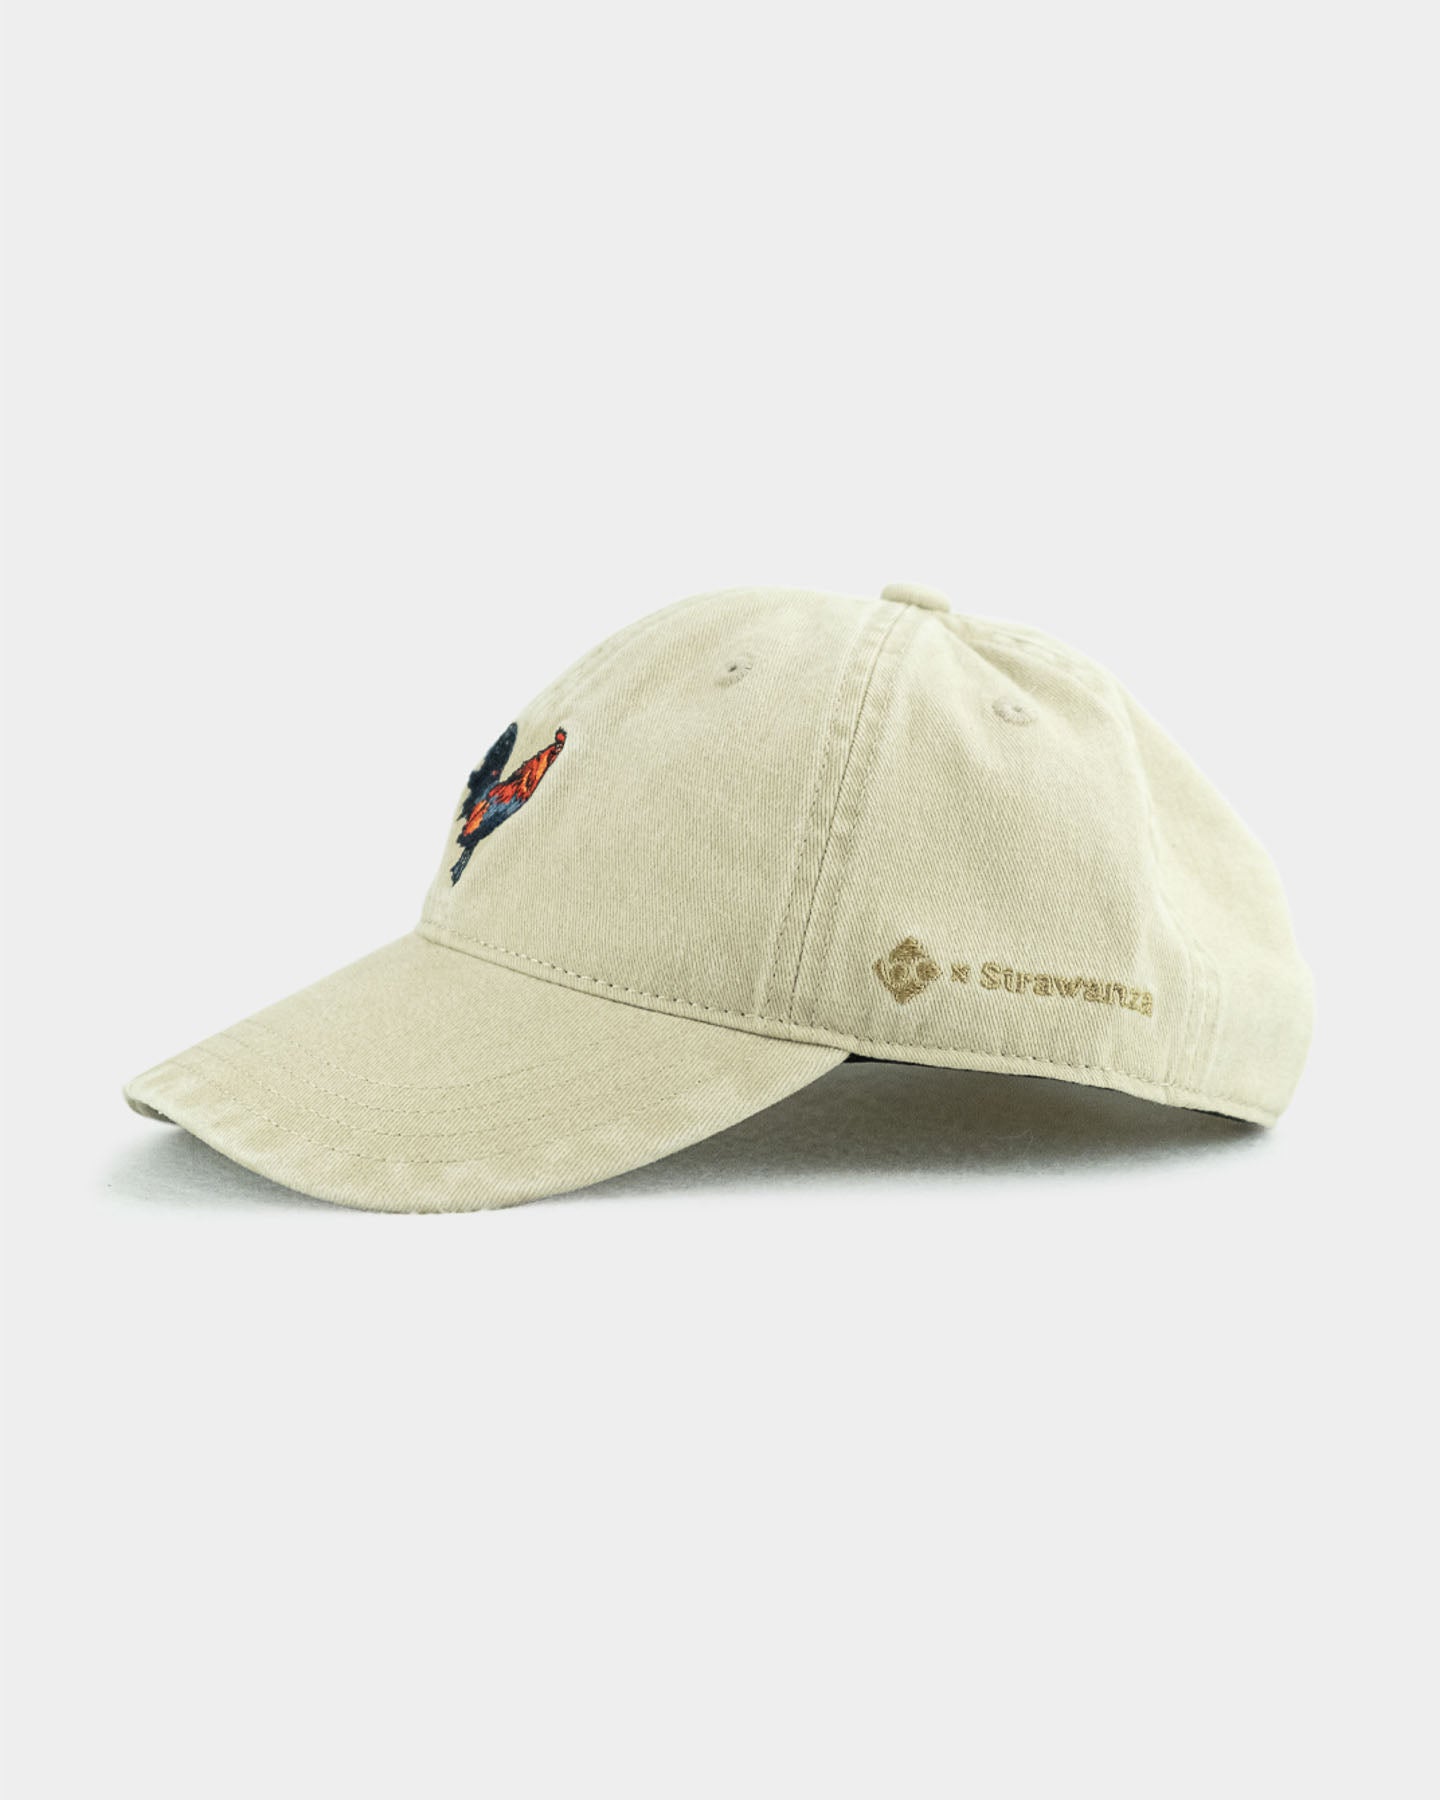 Can you Hendl this Dad Cap